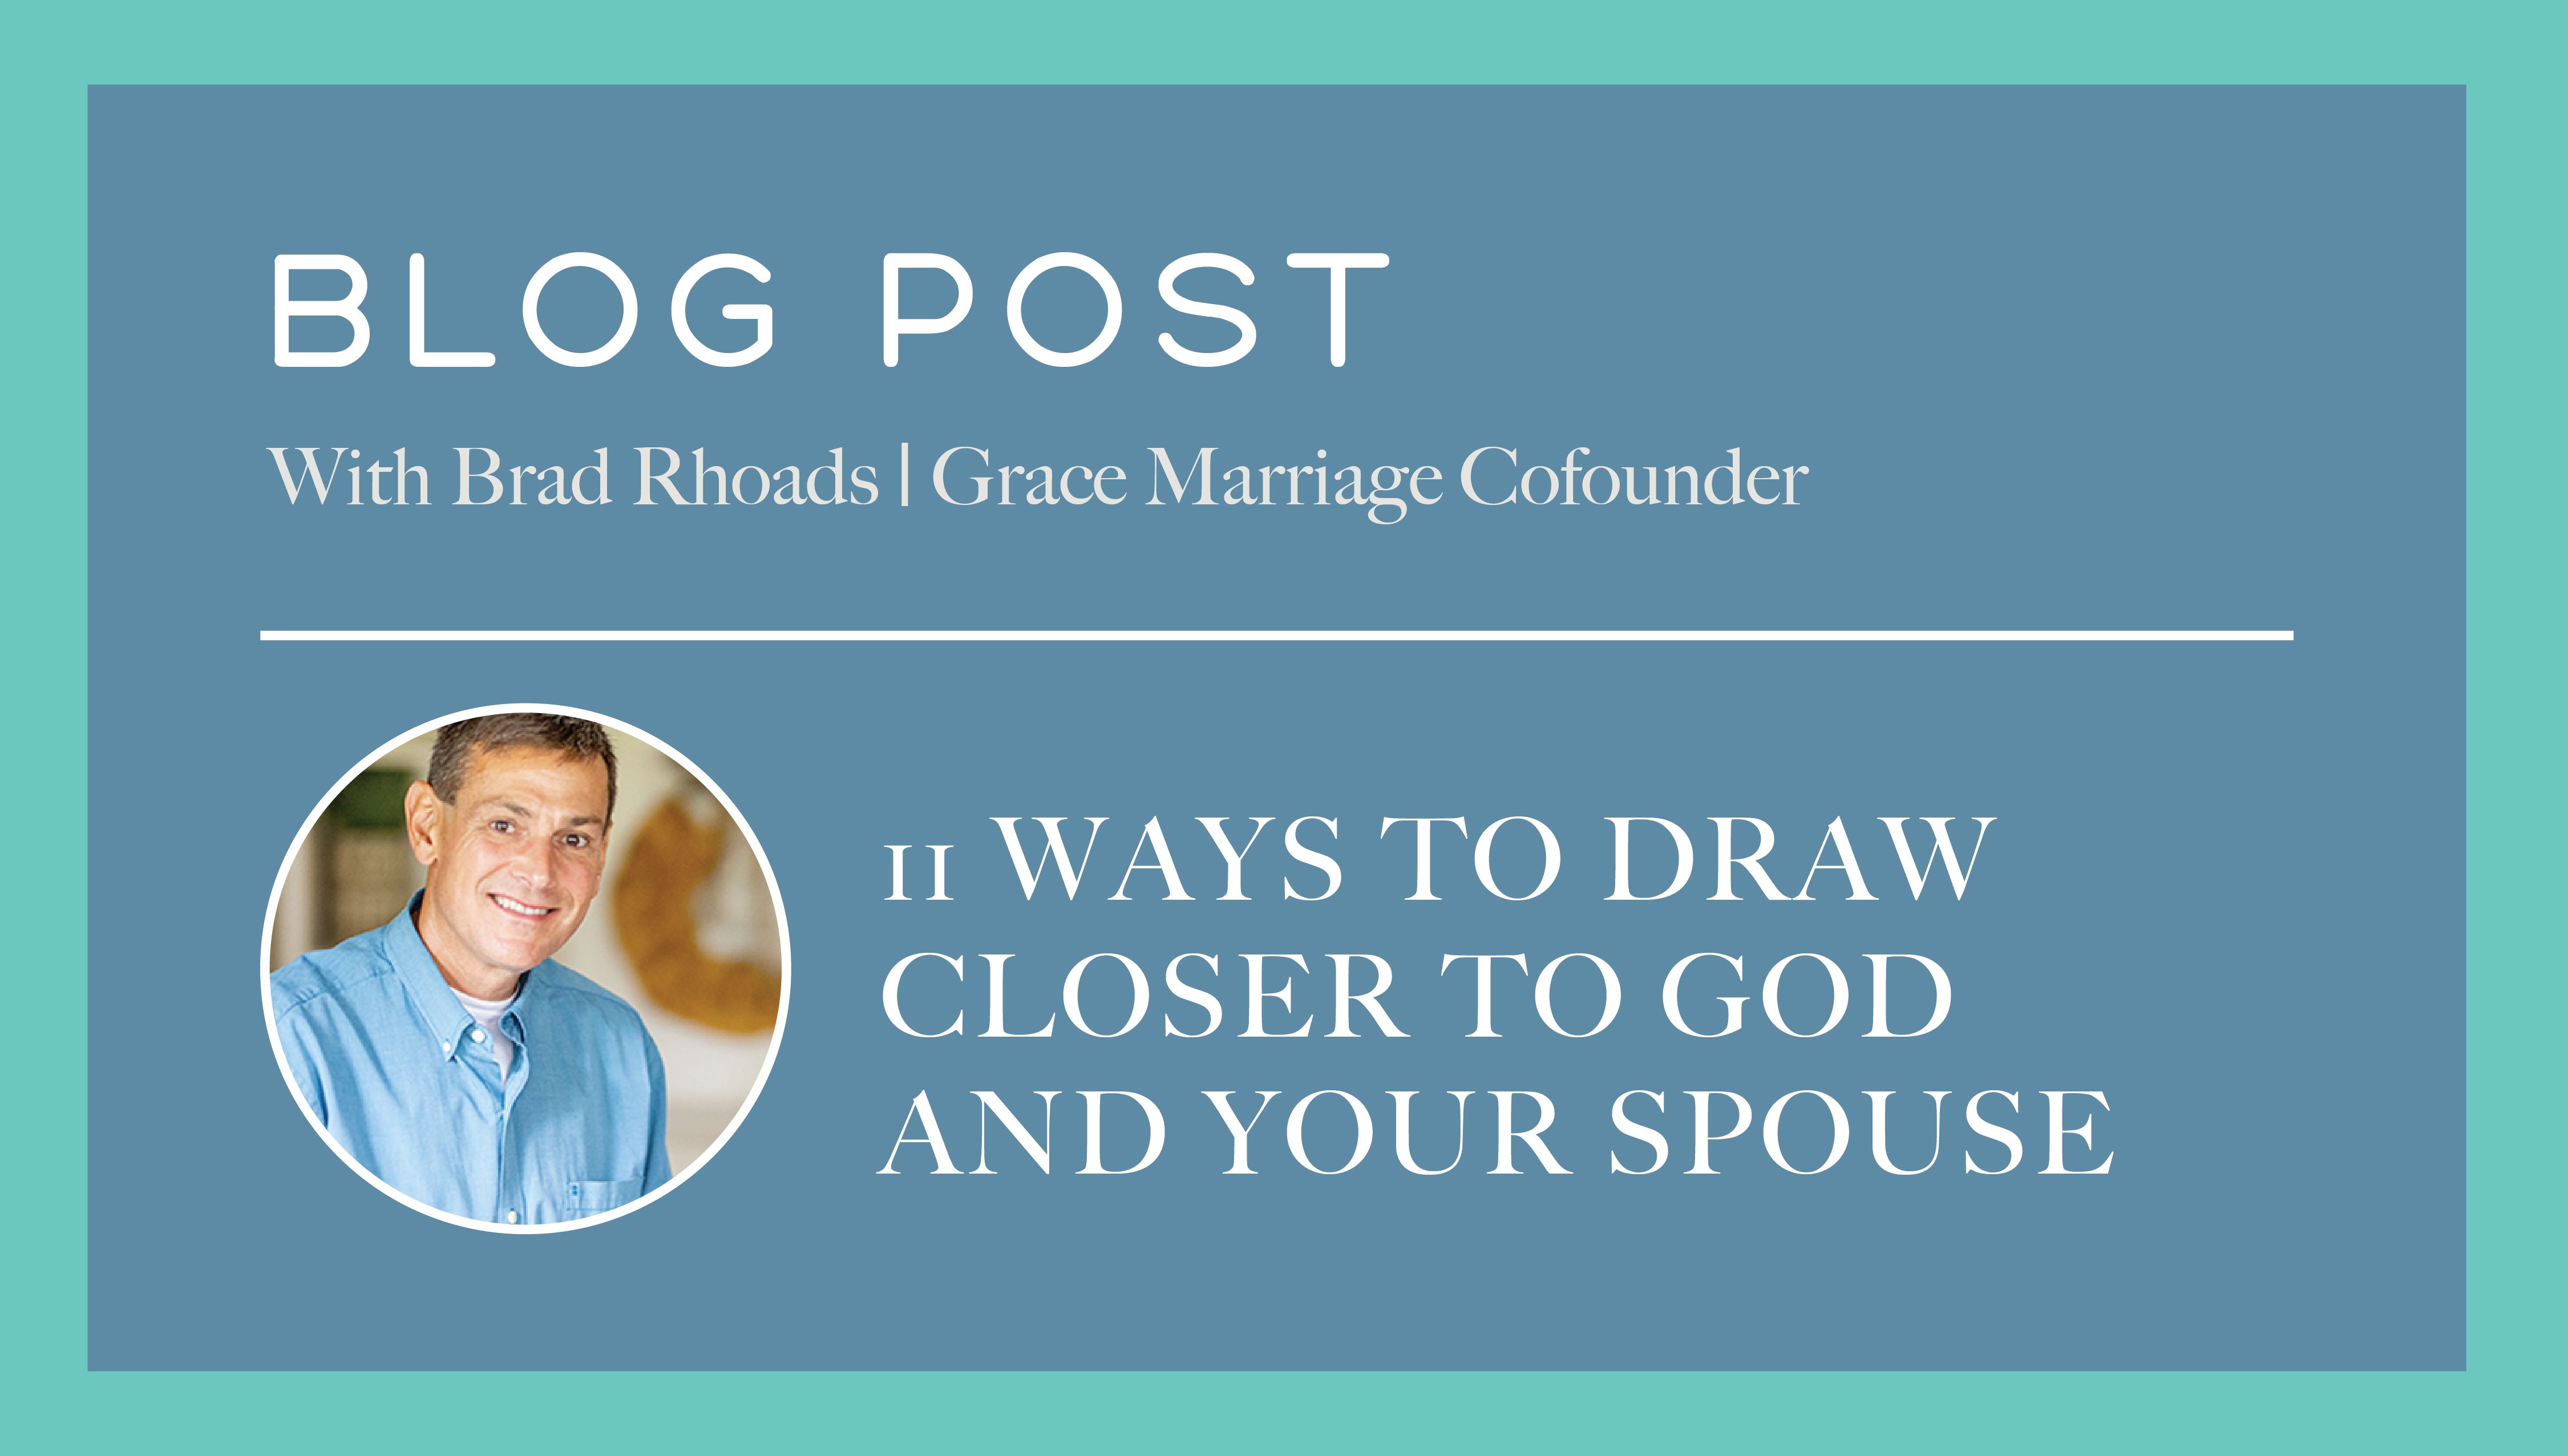 11 Ways to Draw Closer to God and Your Spouse